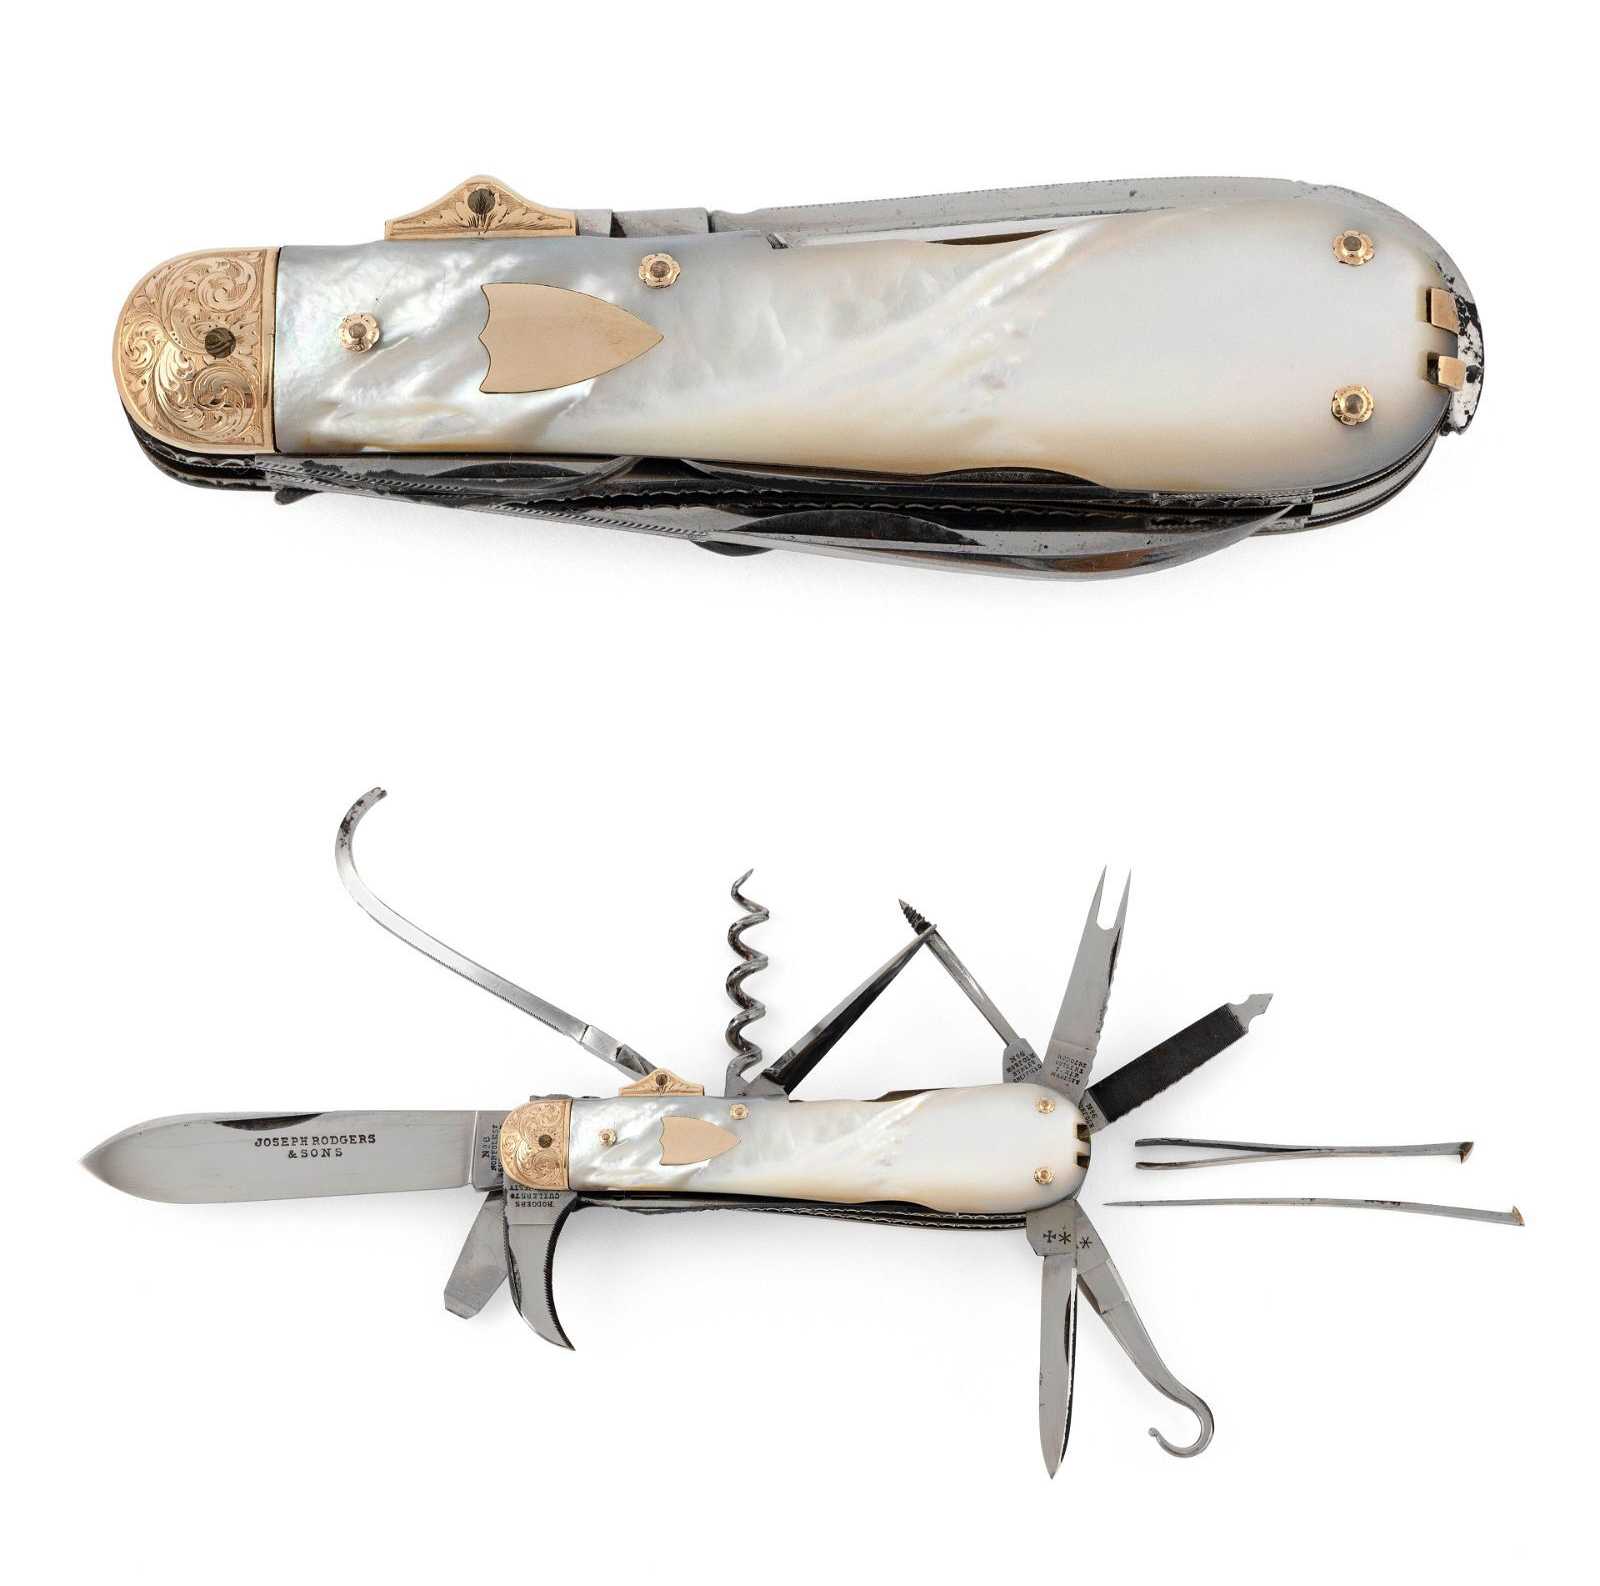 Late 19th-century gold and mother-of-pearl multi-tool sports pocket knife by Joseph Rogers & Sons of Sheffield, England, which sold for $10,000 ($12,600 with buyer’s premium) at Eldred’s.